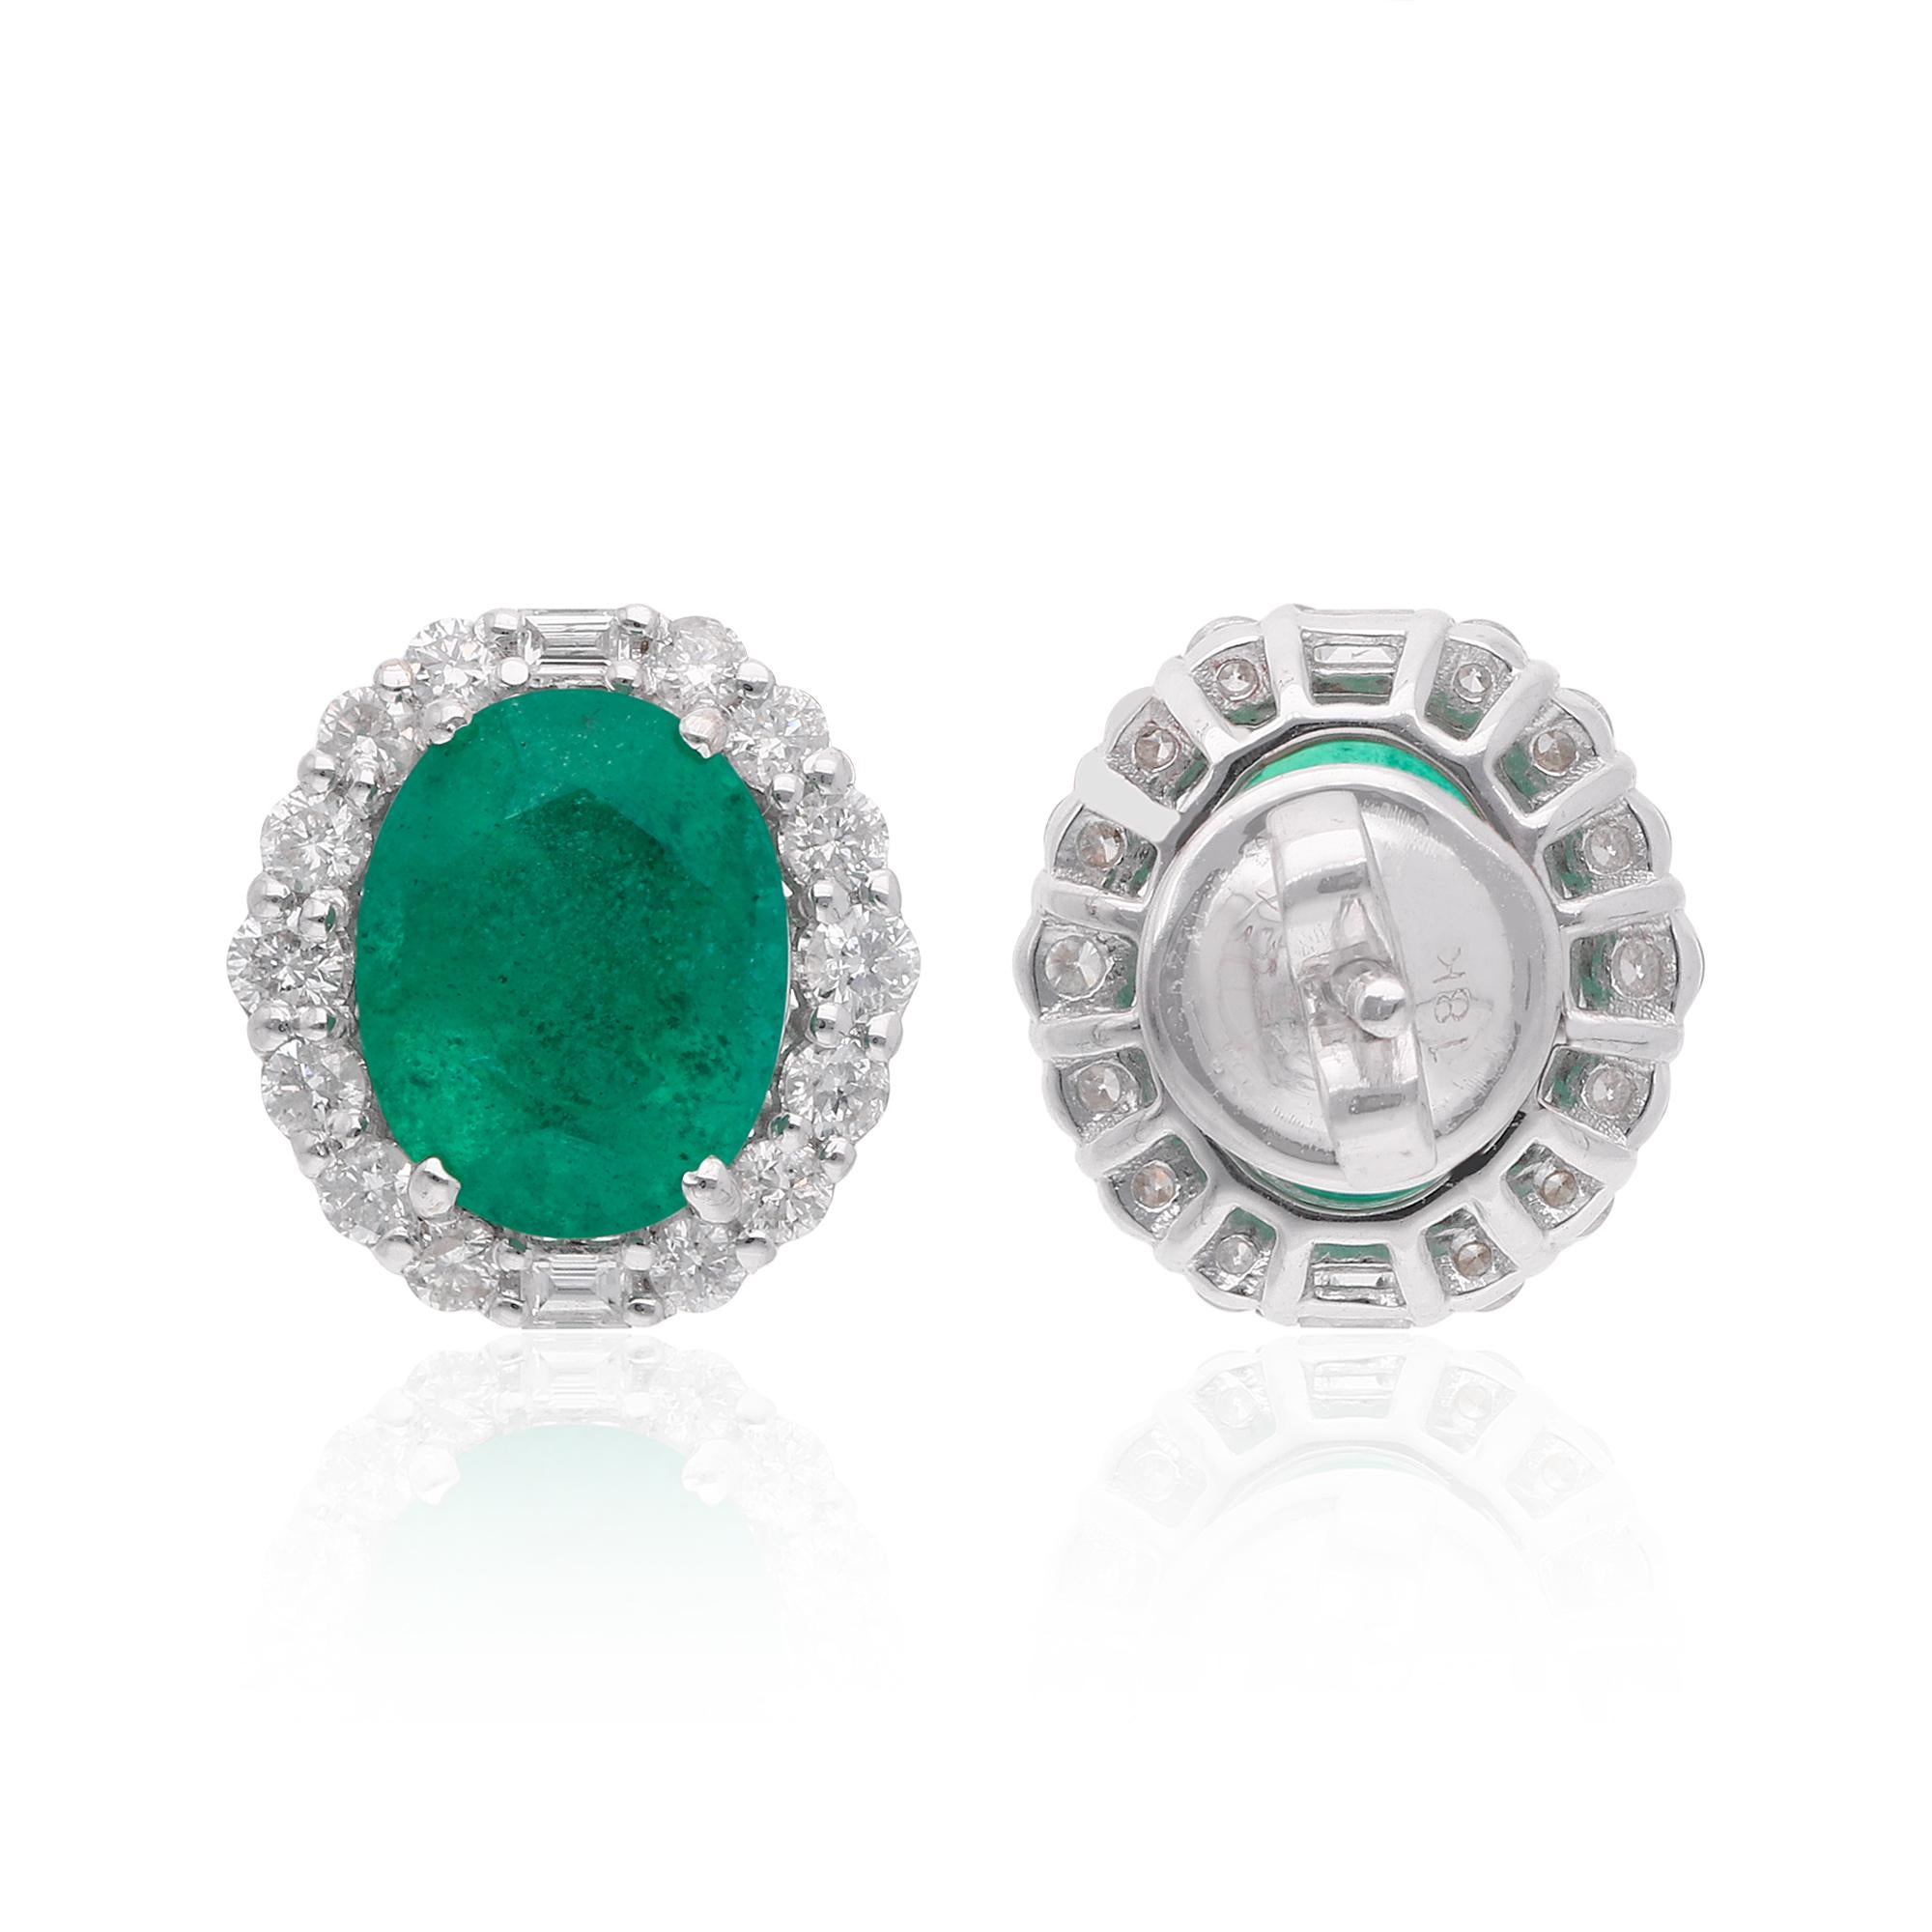 Dive into the magical temptation of this stunning Earrings in attractive shape and design made of White Gold studded with Emerald. An essential ornament to add in your jewellery collection!

✧✧Welcome To Our Shop Spectrum Jewels✧✧

